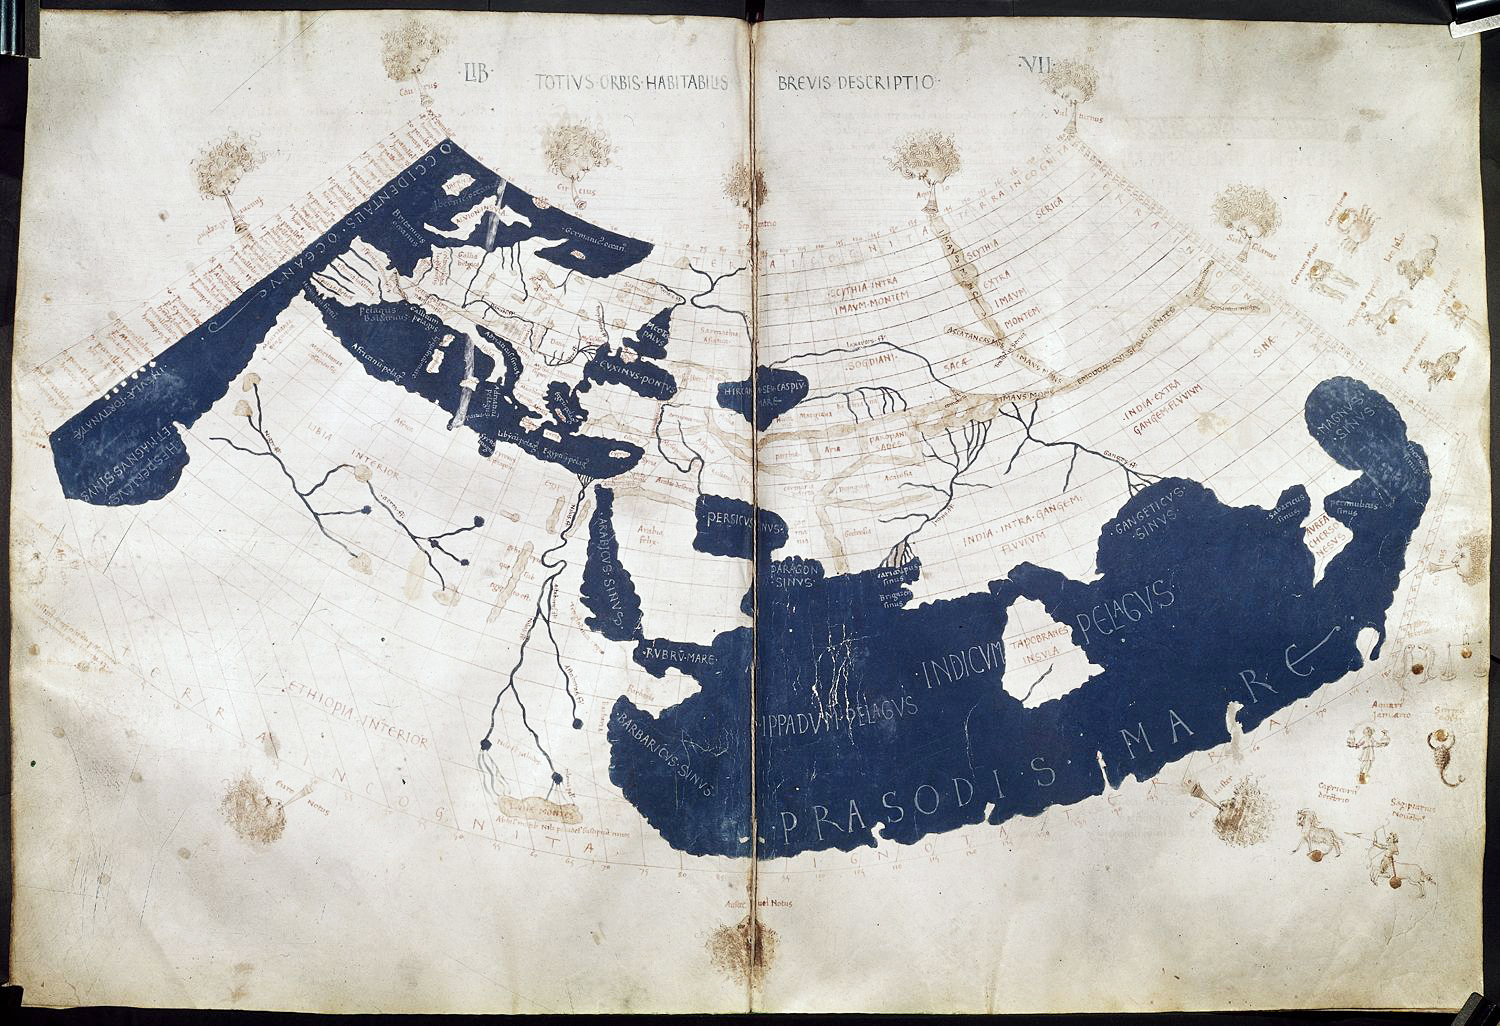 Image source Ptolemy's world map, reconstituted from Ptolemy's Geography (circa 150) in the 15th century, indicating "Sinae"